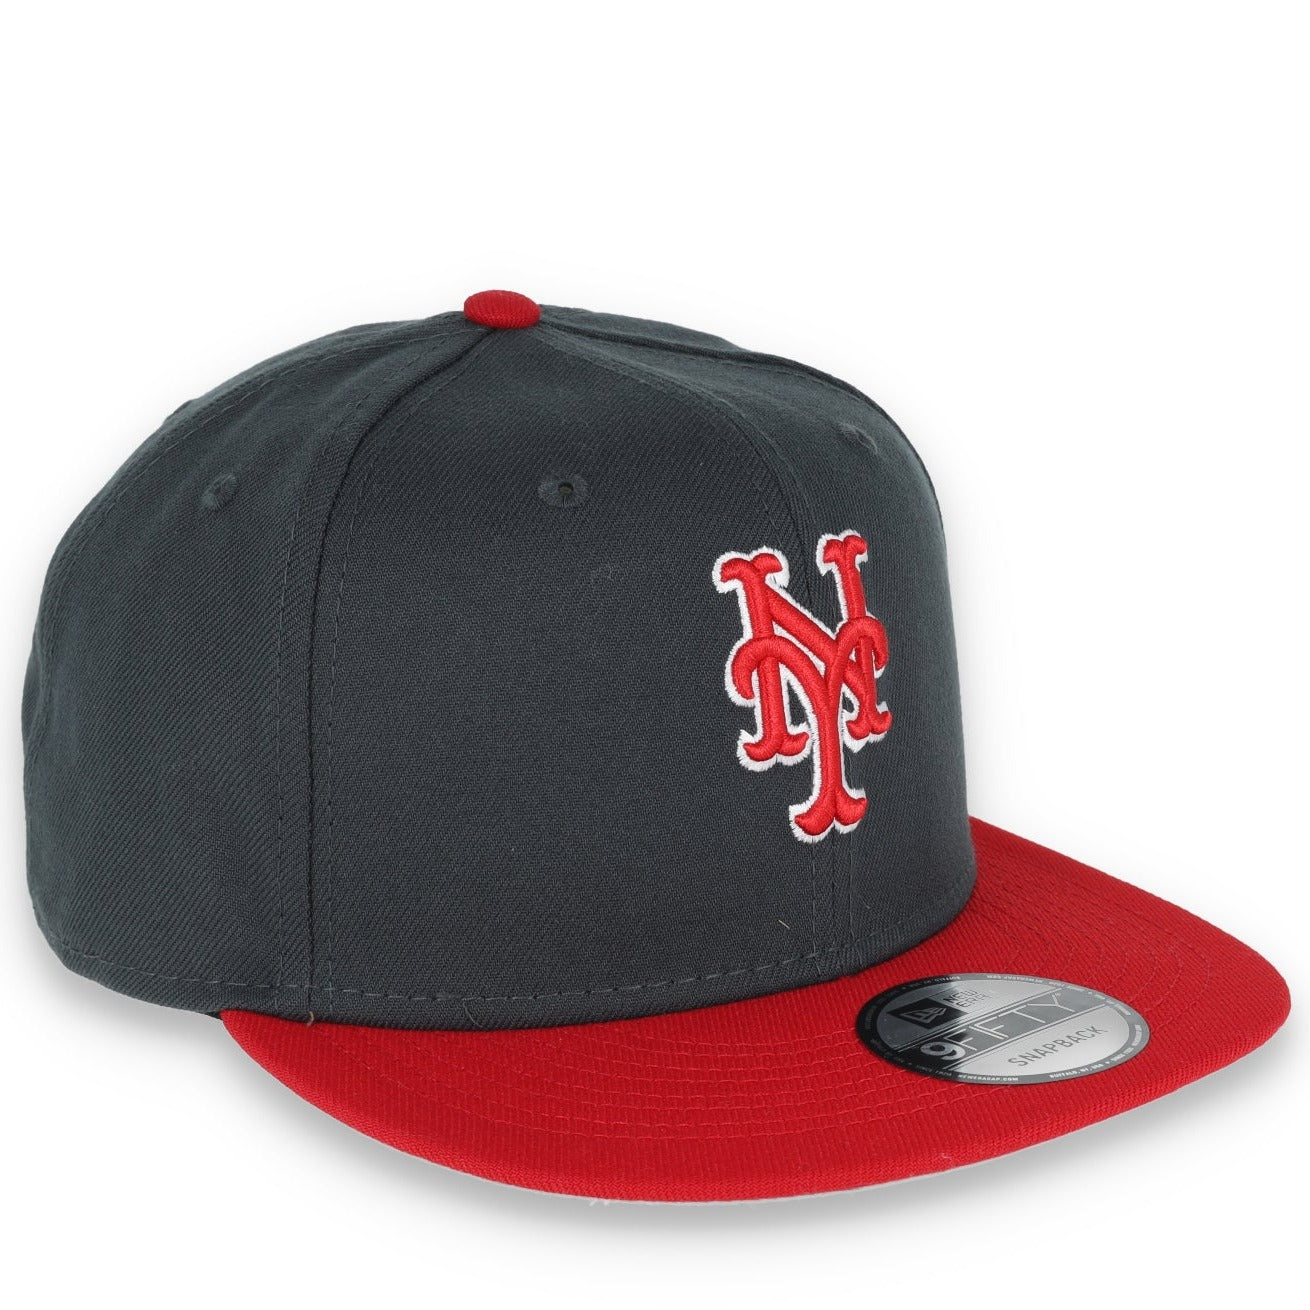 New Era New York Mets 2-Tone Color Pack 9FIFTY Snapback Hat- Grey/Scarlet